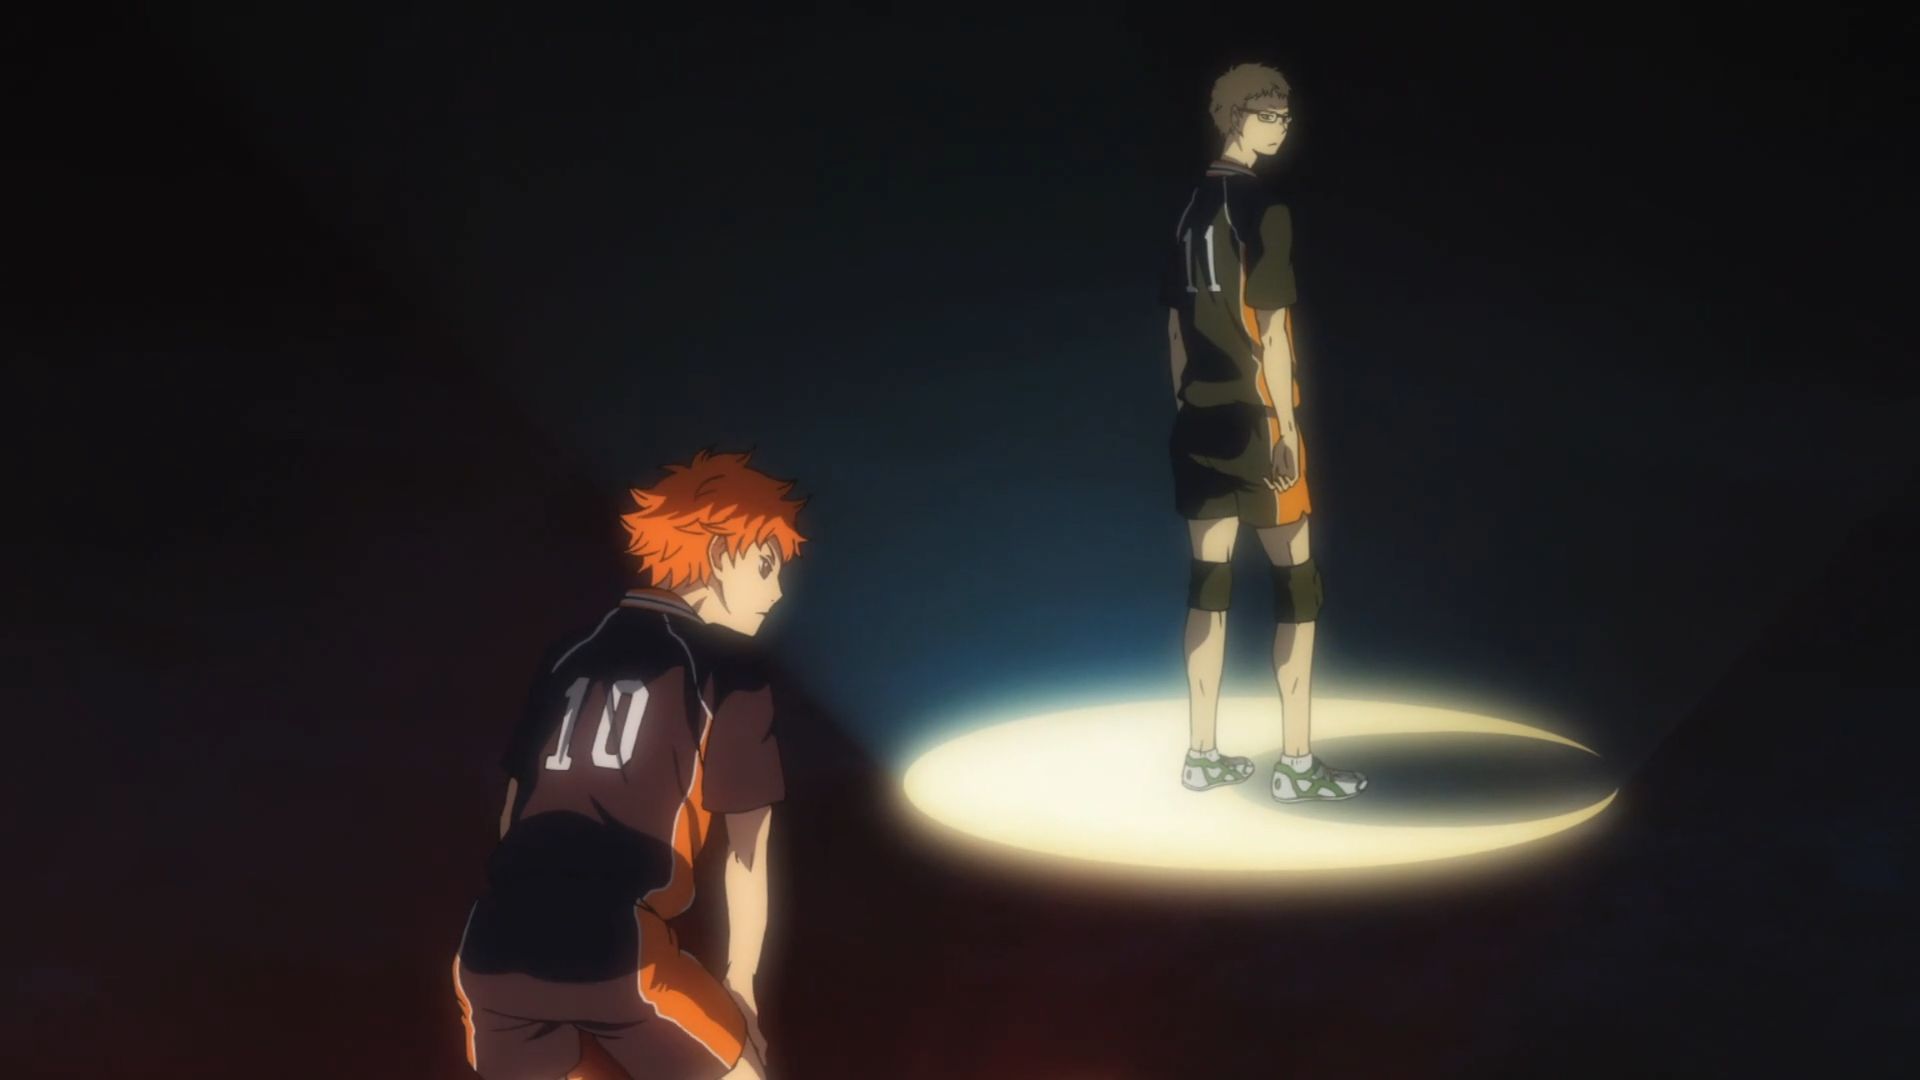 Haikyuu!!: To the Top ep.18 – Cursed Gravity! - I drink and watch